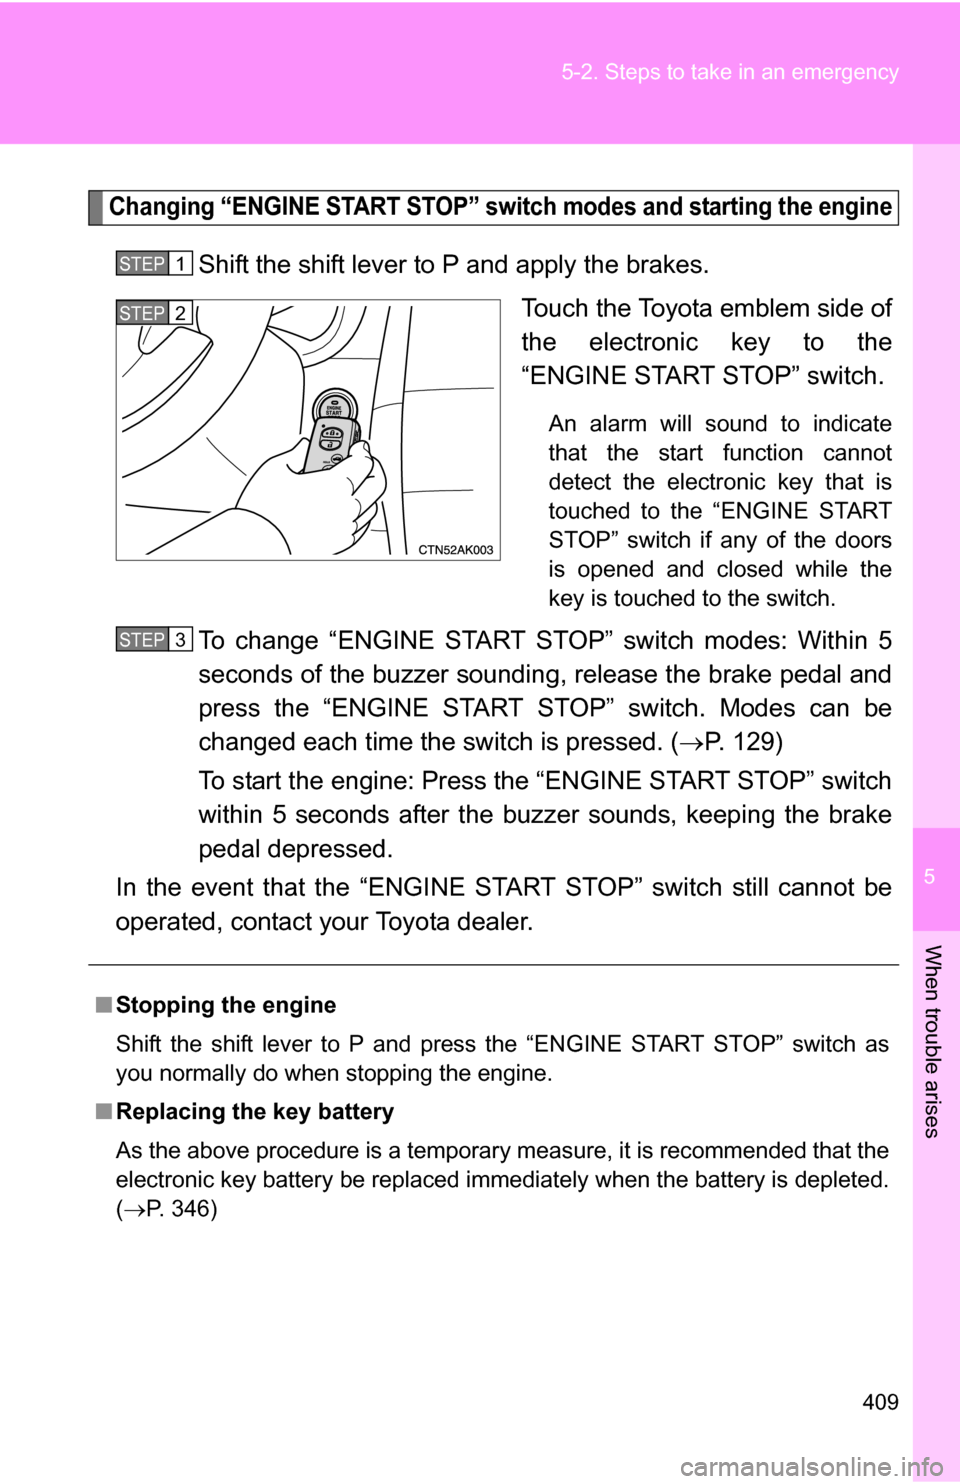 TOYOTA COROLLA 2010 10.G Owners Manual 5
When trouble arises
409
5-2. Steps to take in an emergency
Changing “ENGINE START STOP” switch modes and starting the engine
Shift the shift lever to P and apply the brakes.
Touch the Toyota emb